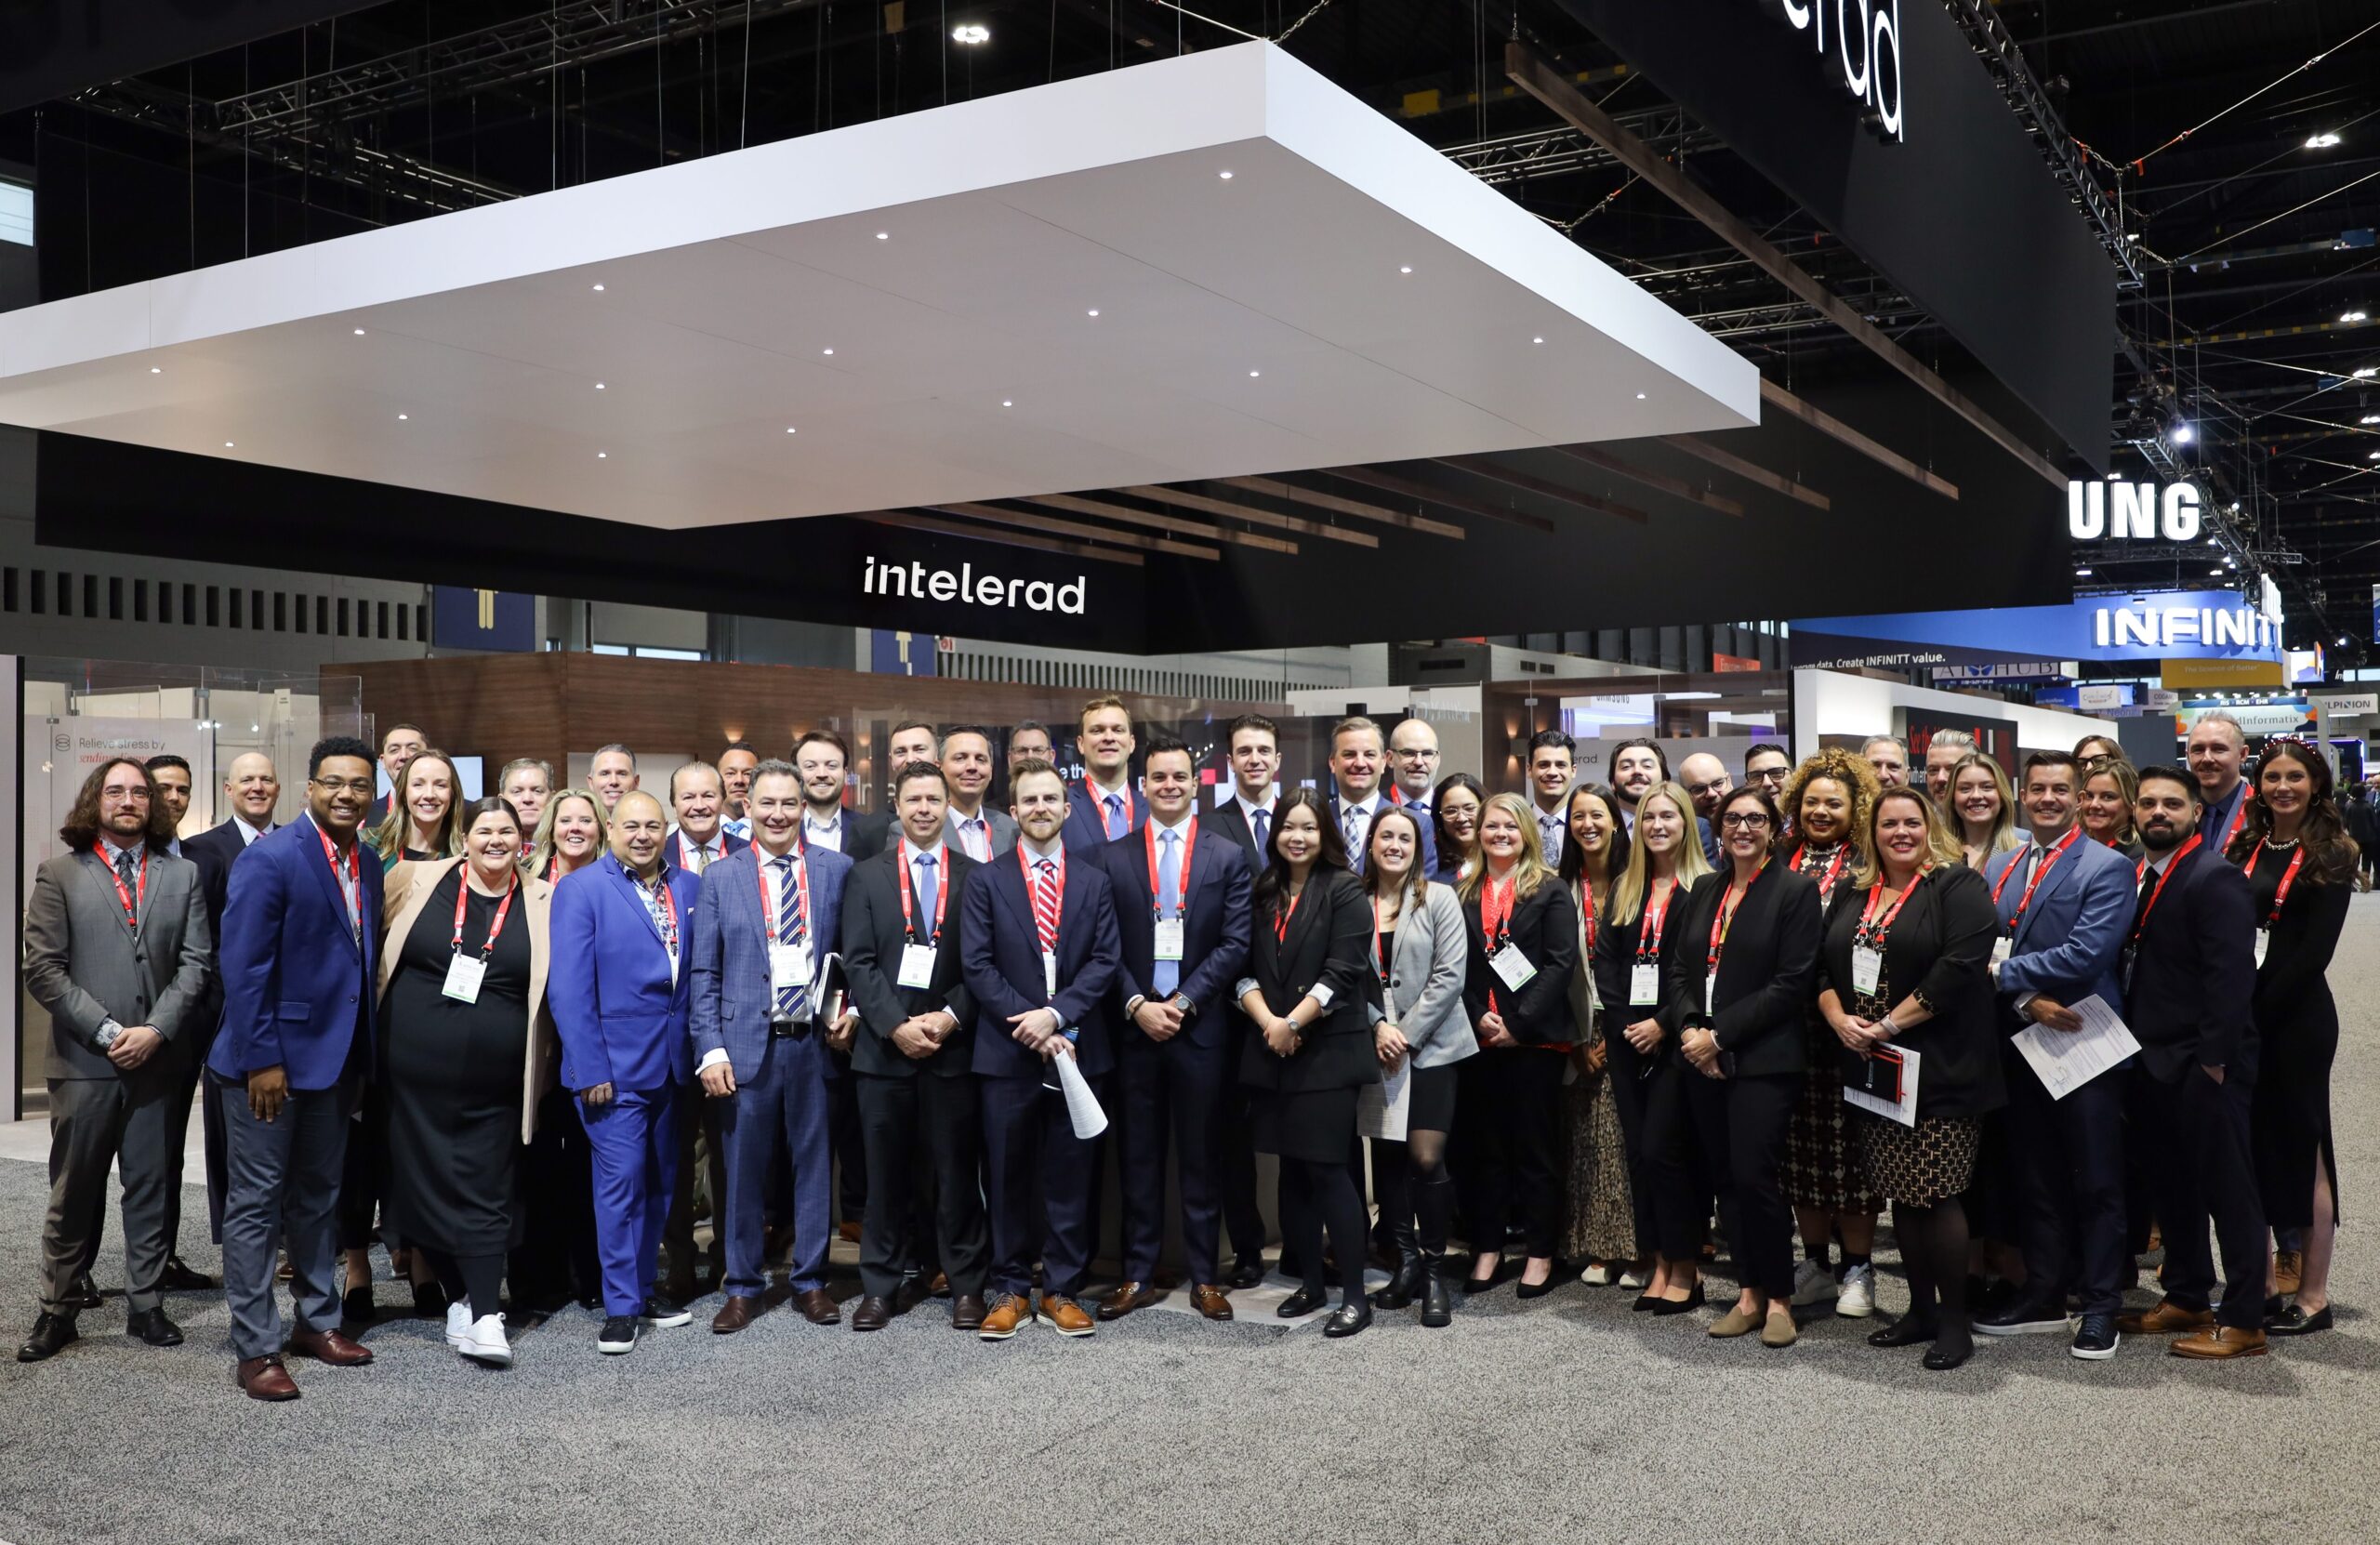 Group of professionals posing for a photo at a trade show booth with the name 